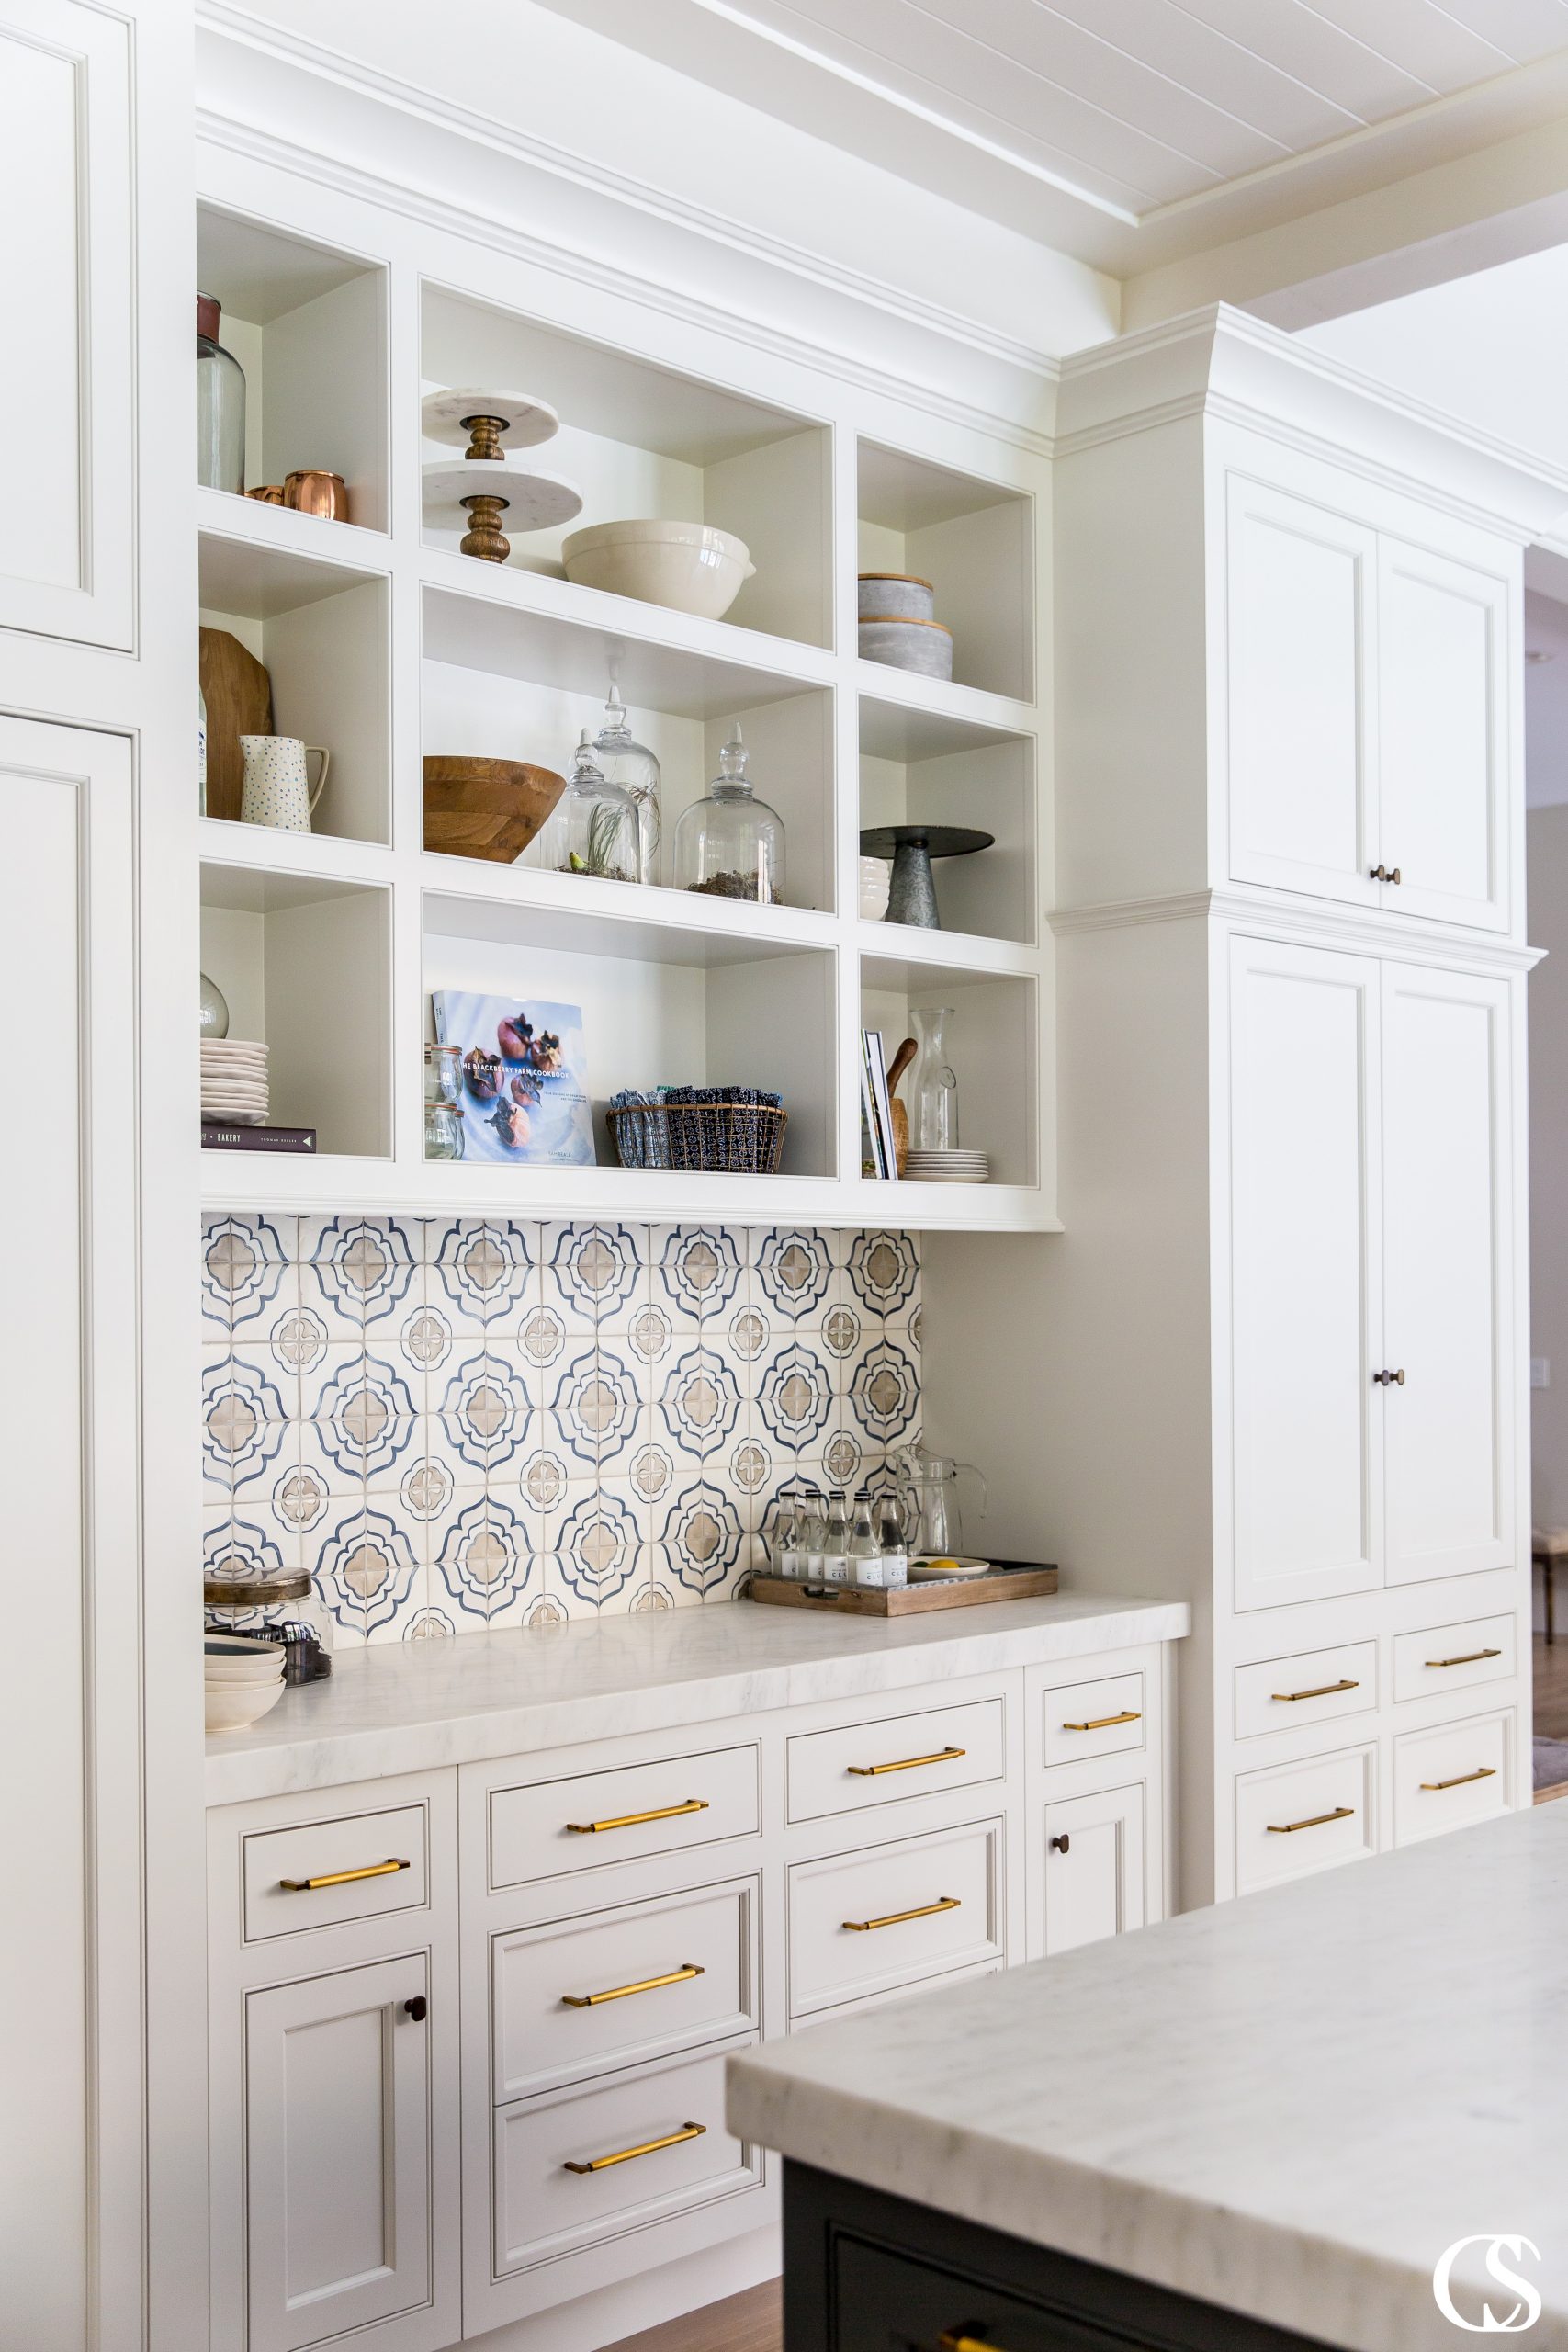 Not every item in your kitchen should be tucked away behind closed doors! Think about which items you'd love to display and design unique custom cabinets around them.